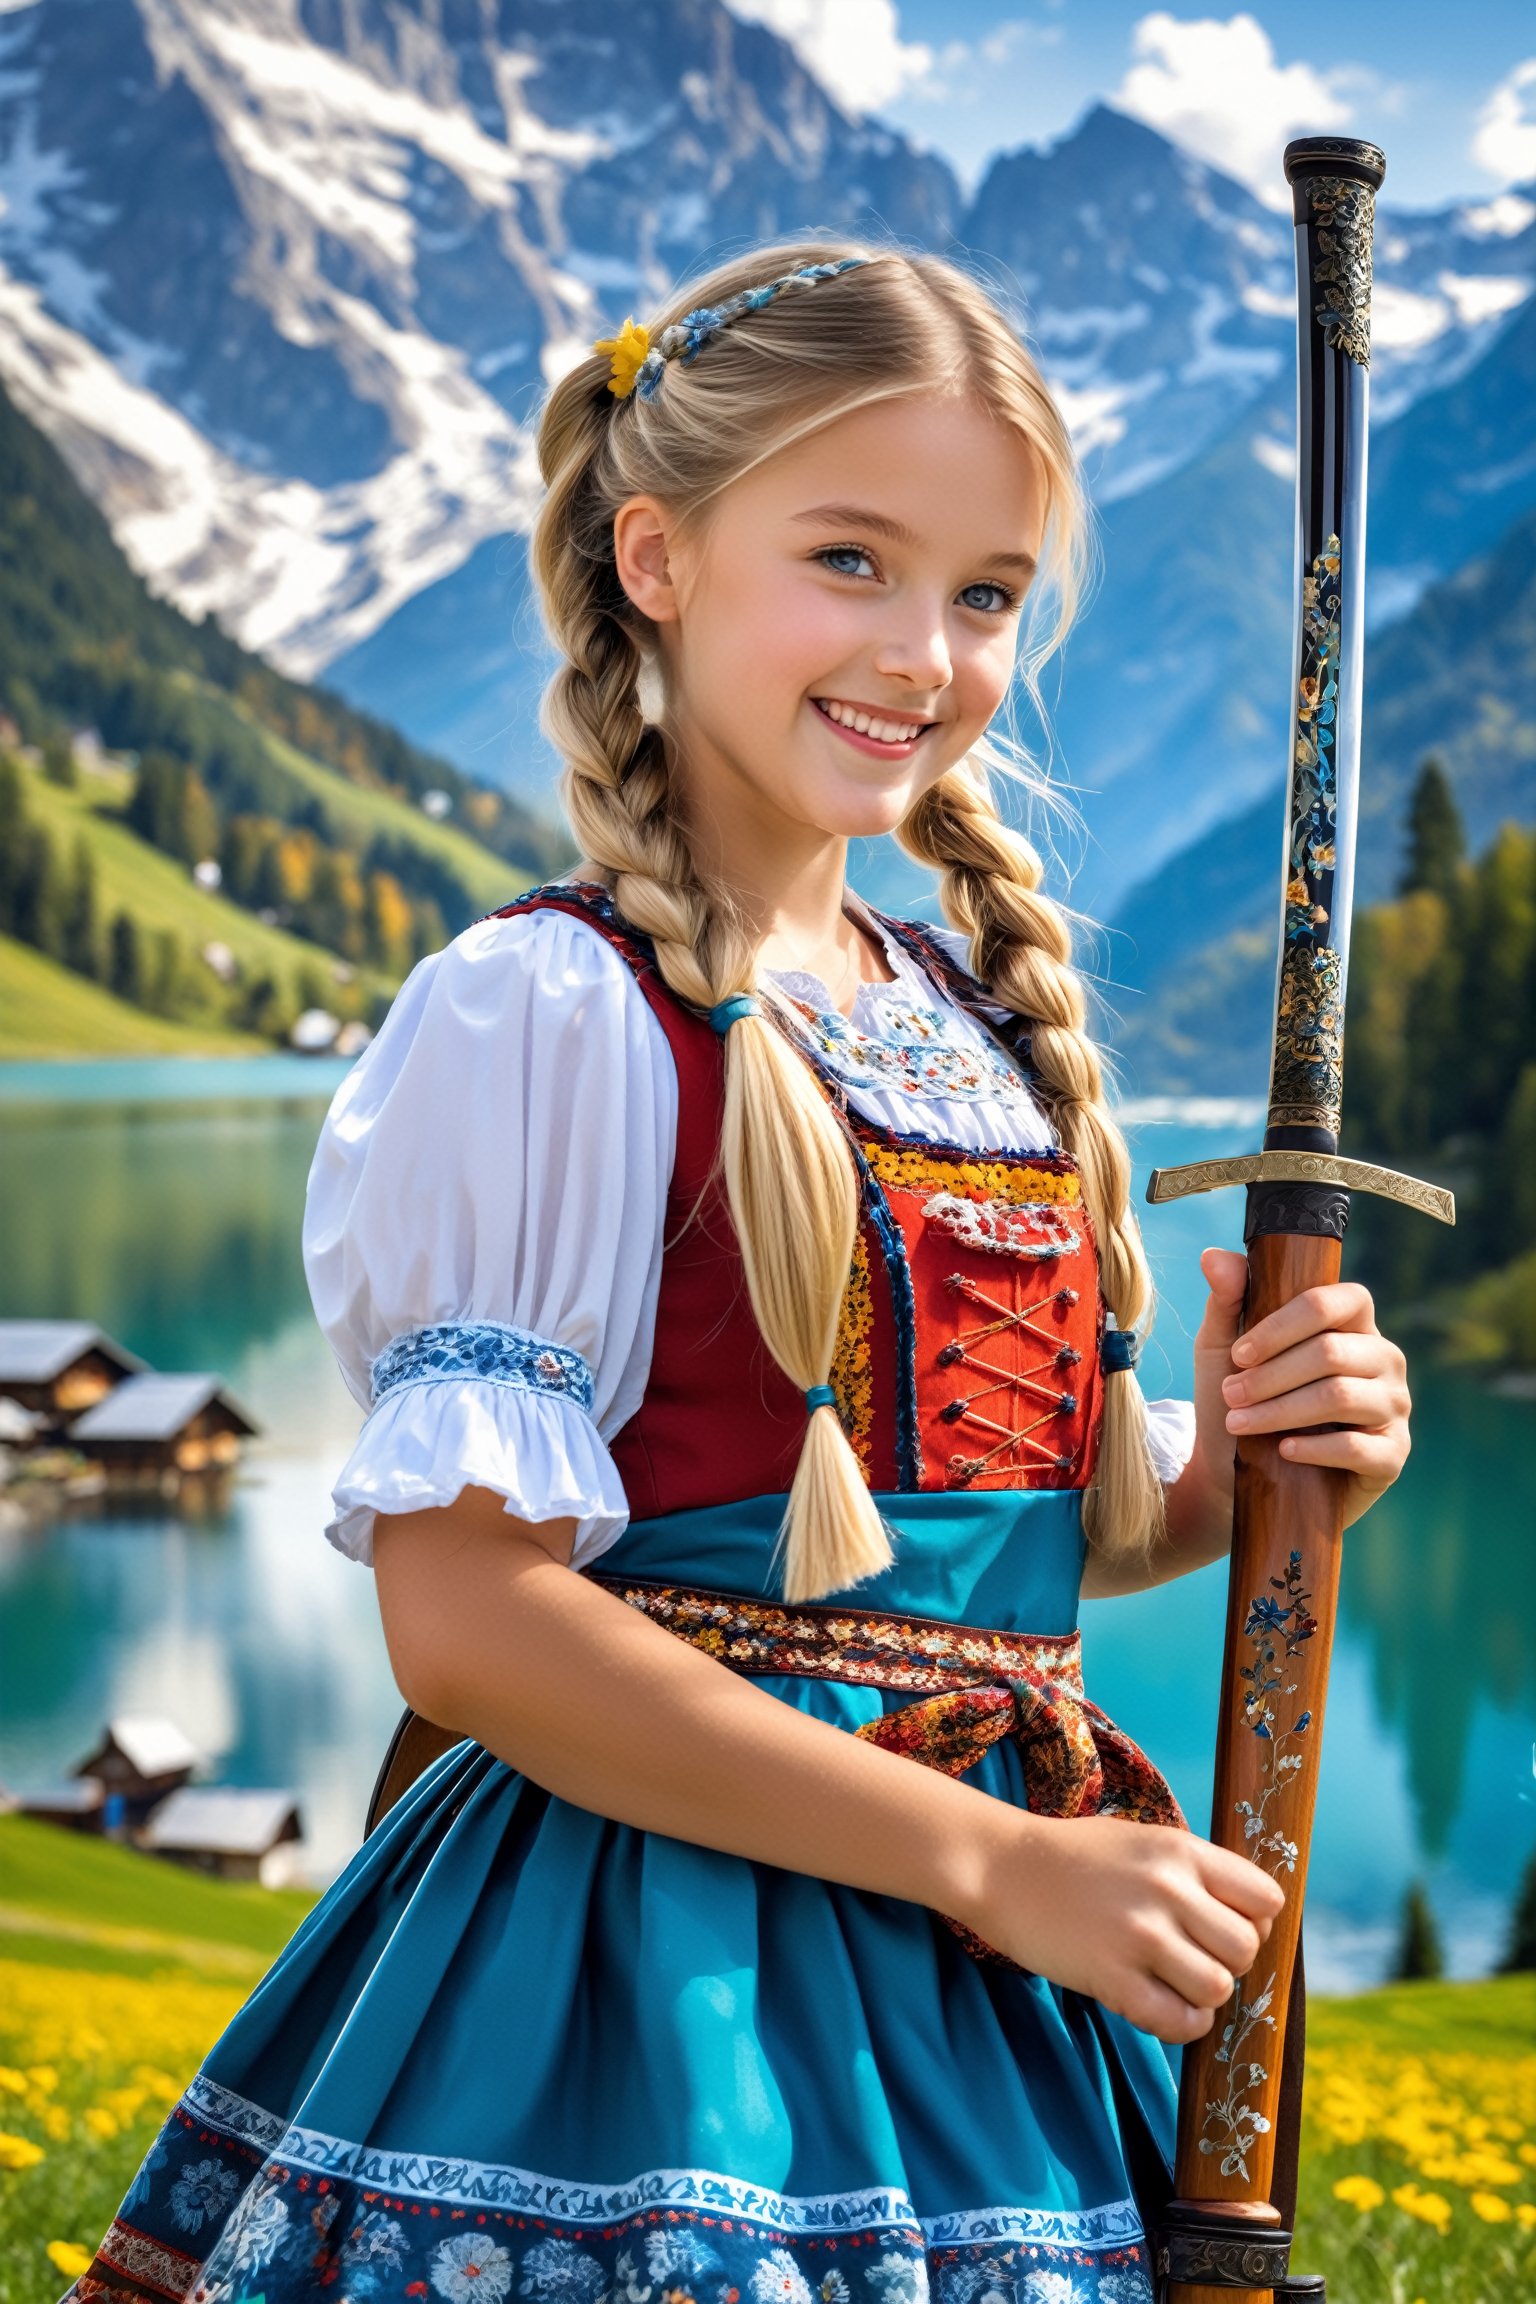  photorealistic, bokeh,
beautiful scene set against the majestic backdrop of the Alps, A young girl,long blonde pigtails, dressed in a traditional dirndl, stands smiling brightly,Her dirndl is adorned with intricate patterns and vibrant colors, reflecting the traditional Bavarian style,(holding a KATANA in hands), which contrasts sharply with her cheerful demeanor and the serene, picturesque mountain landscape.,y0sem1te,hubggirl,yva11ey1,photo r3al,holding gun,HG_1,gunatyou,DonMM1y4XL